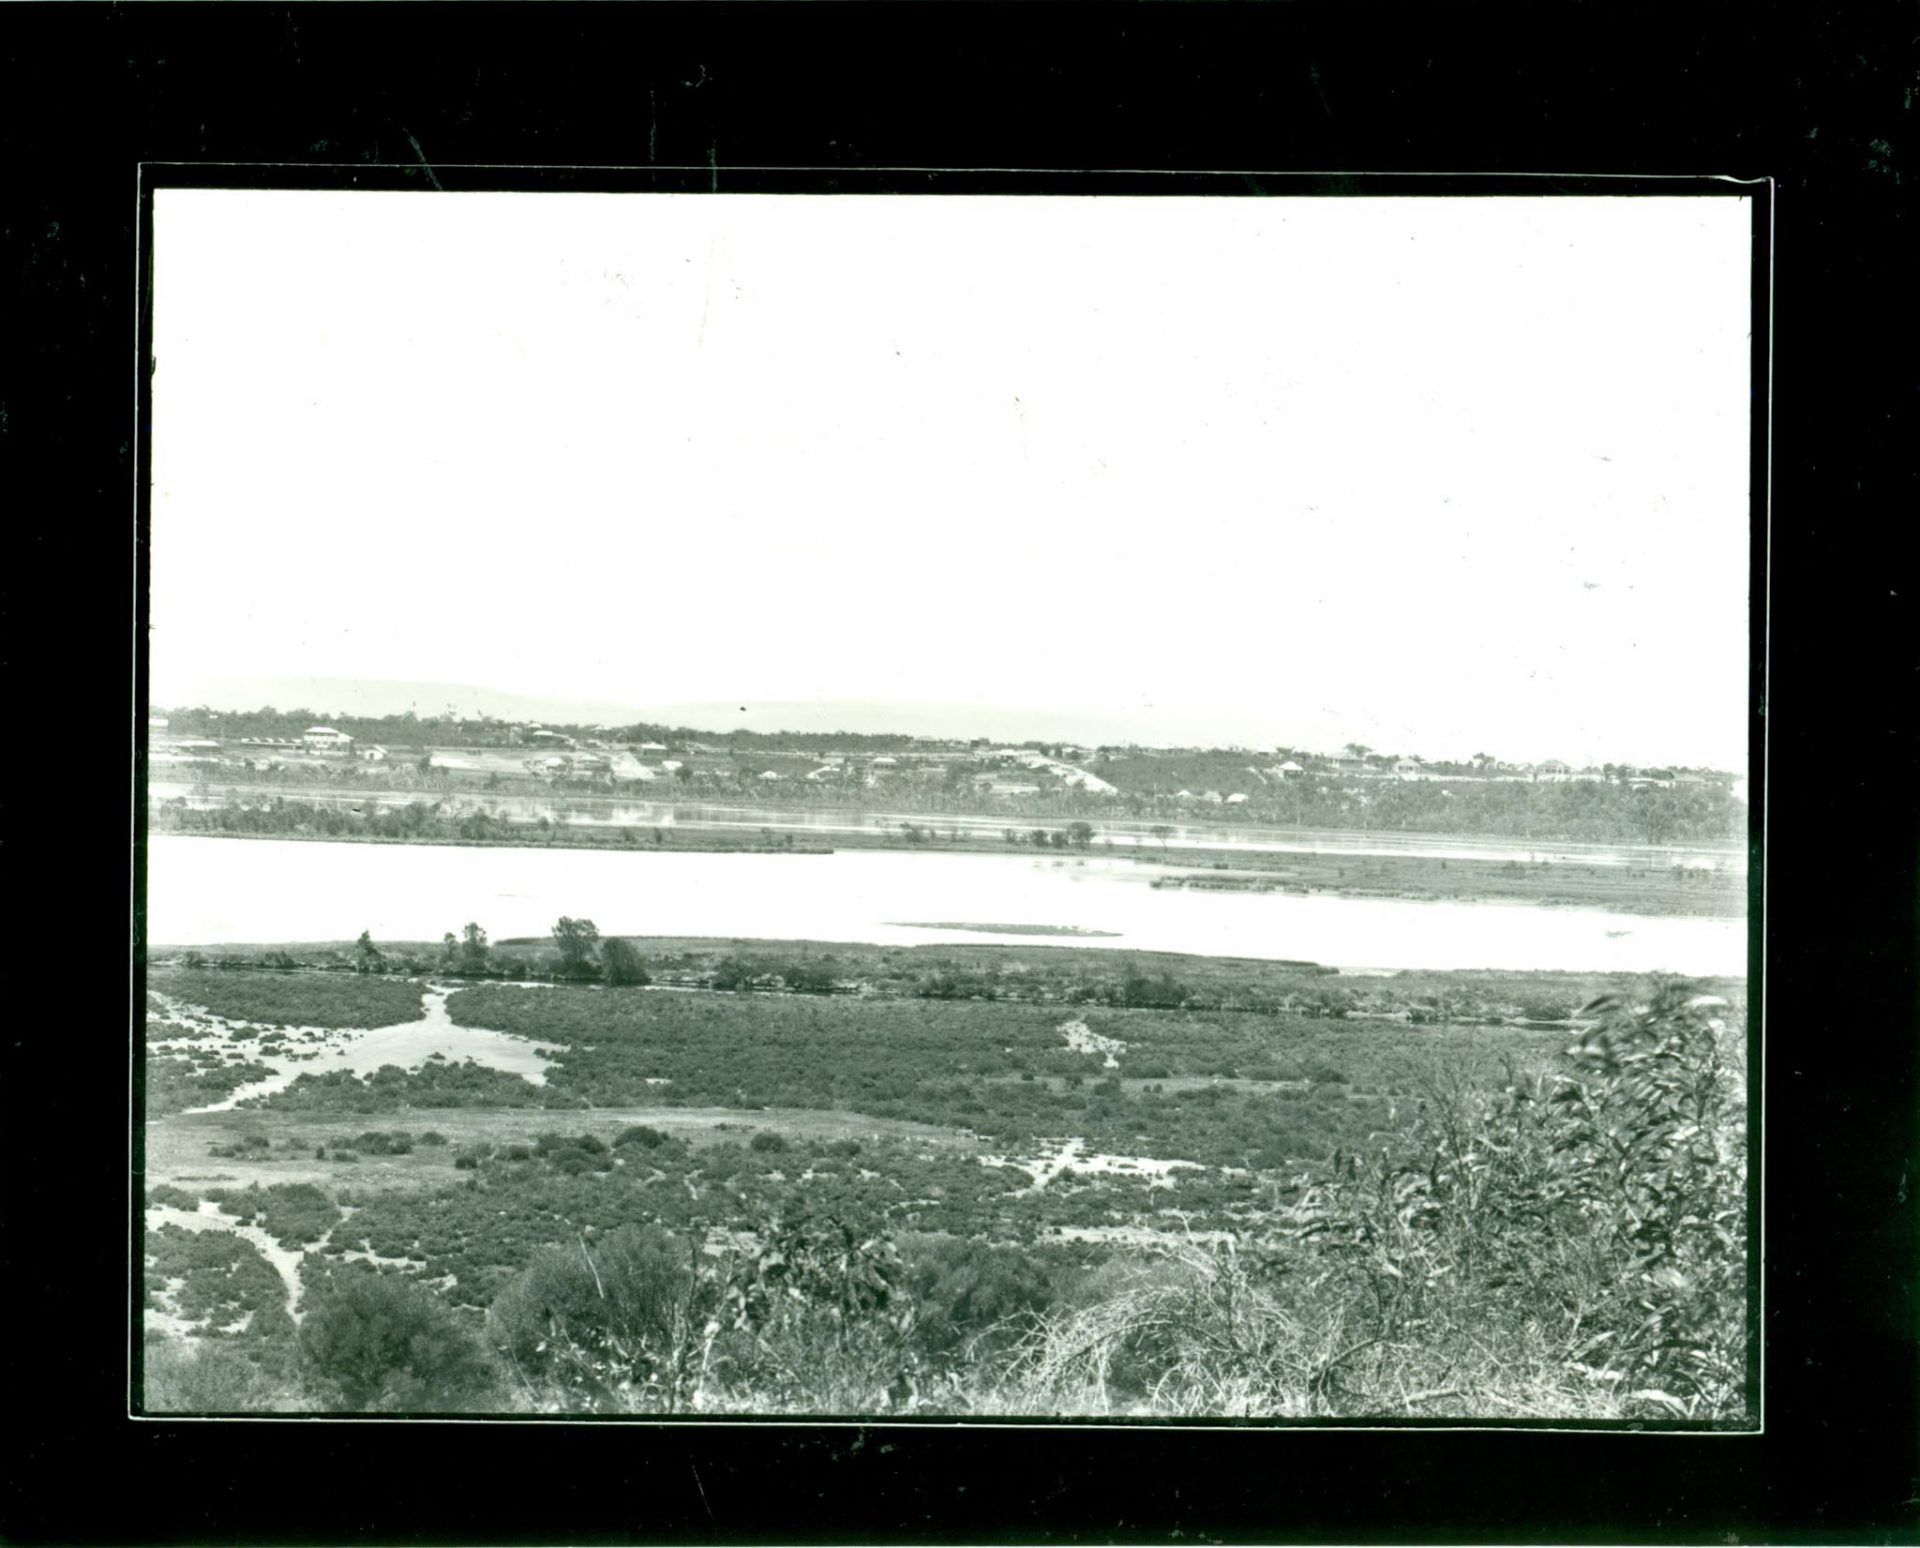 c1914-View-from-East-perth-Cemeteries-0001-1920x1548.jpg